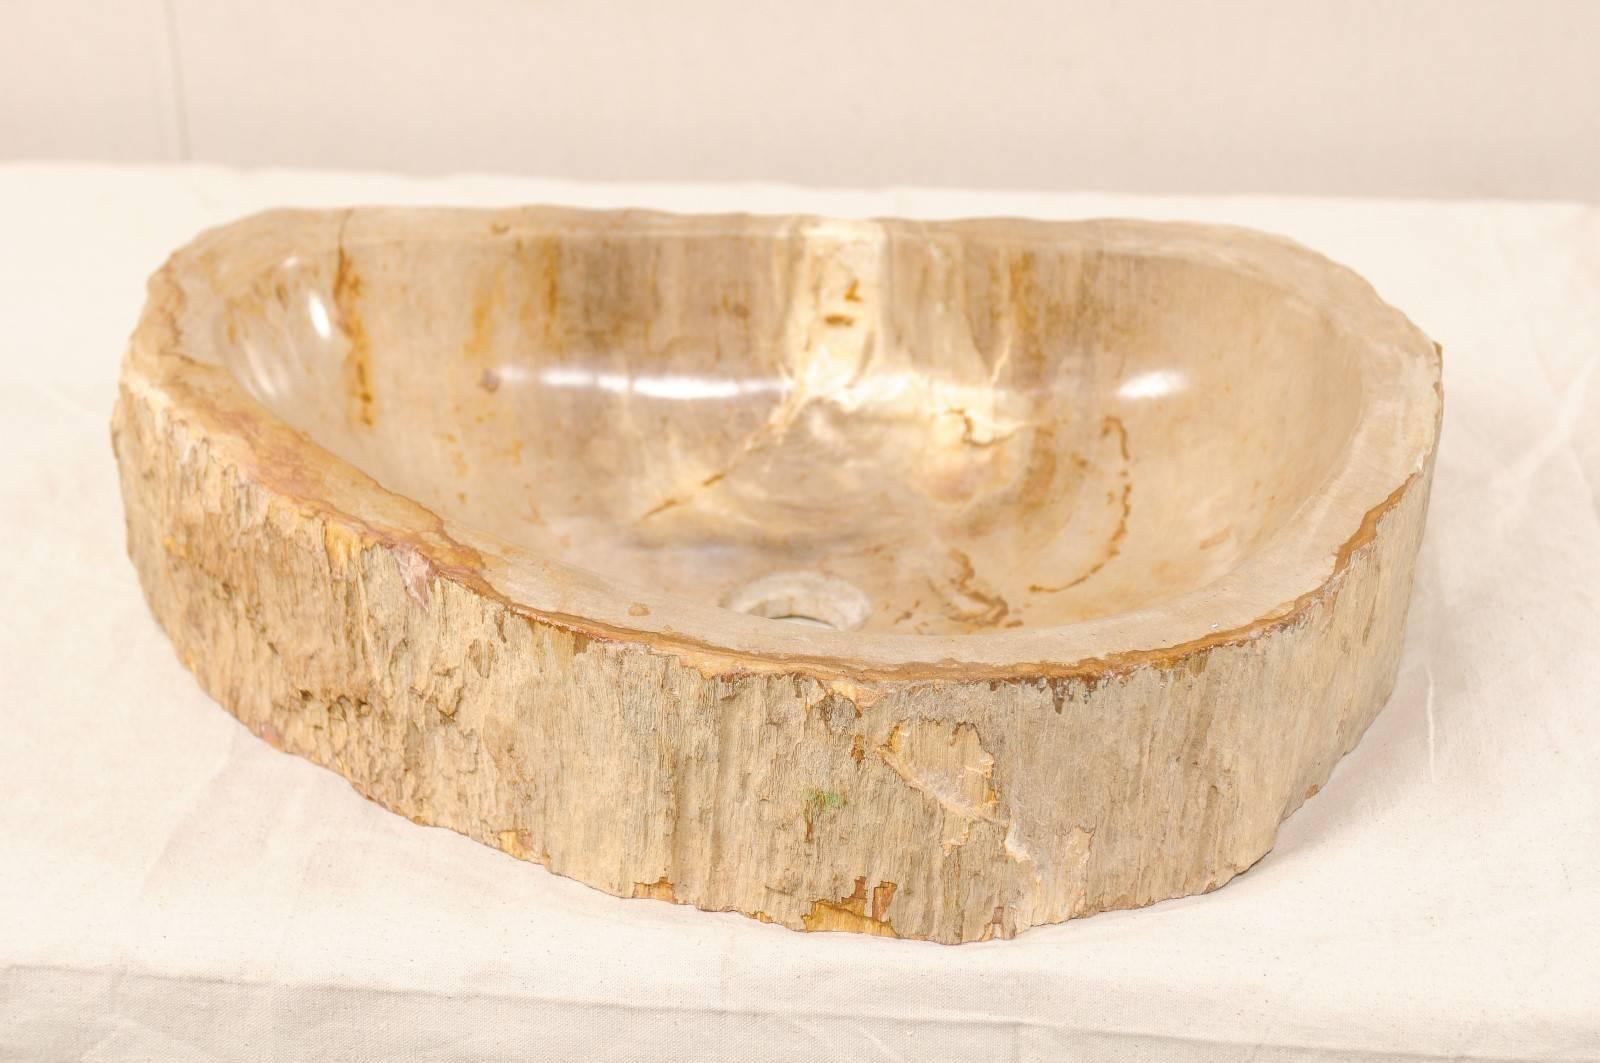 Rustic Polished Petrified Wood Sink in Cream and Beige Tones, Perfect for a Vanity